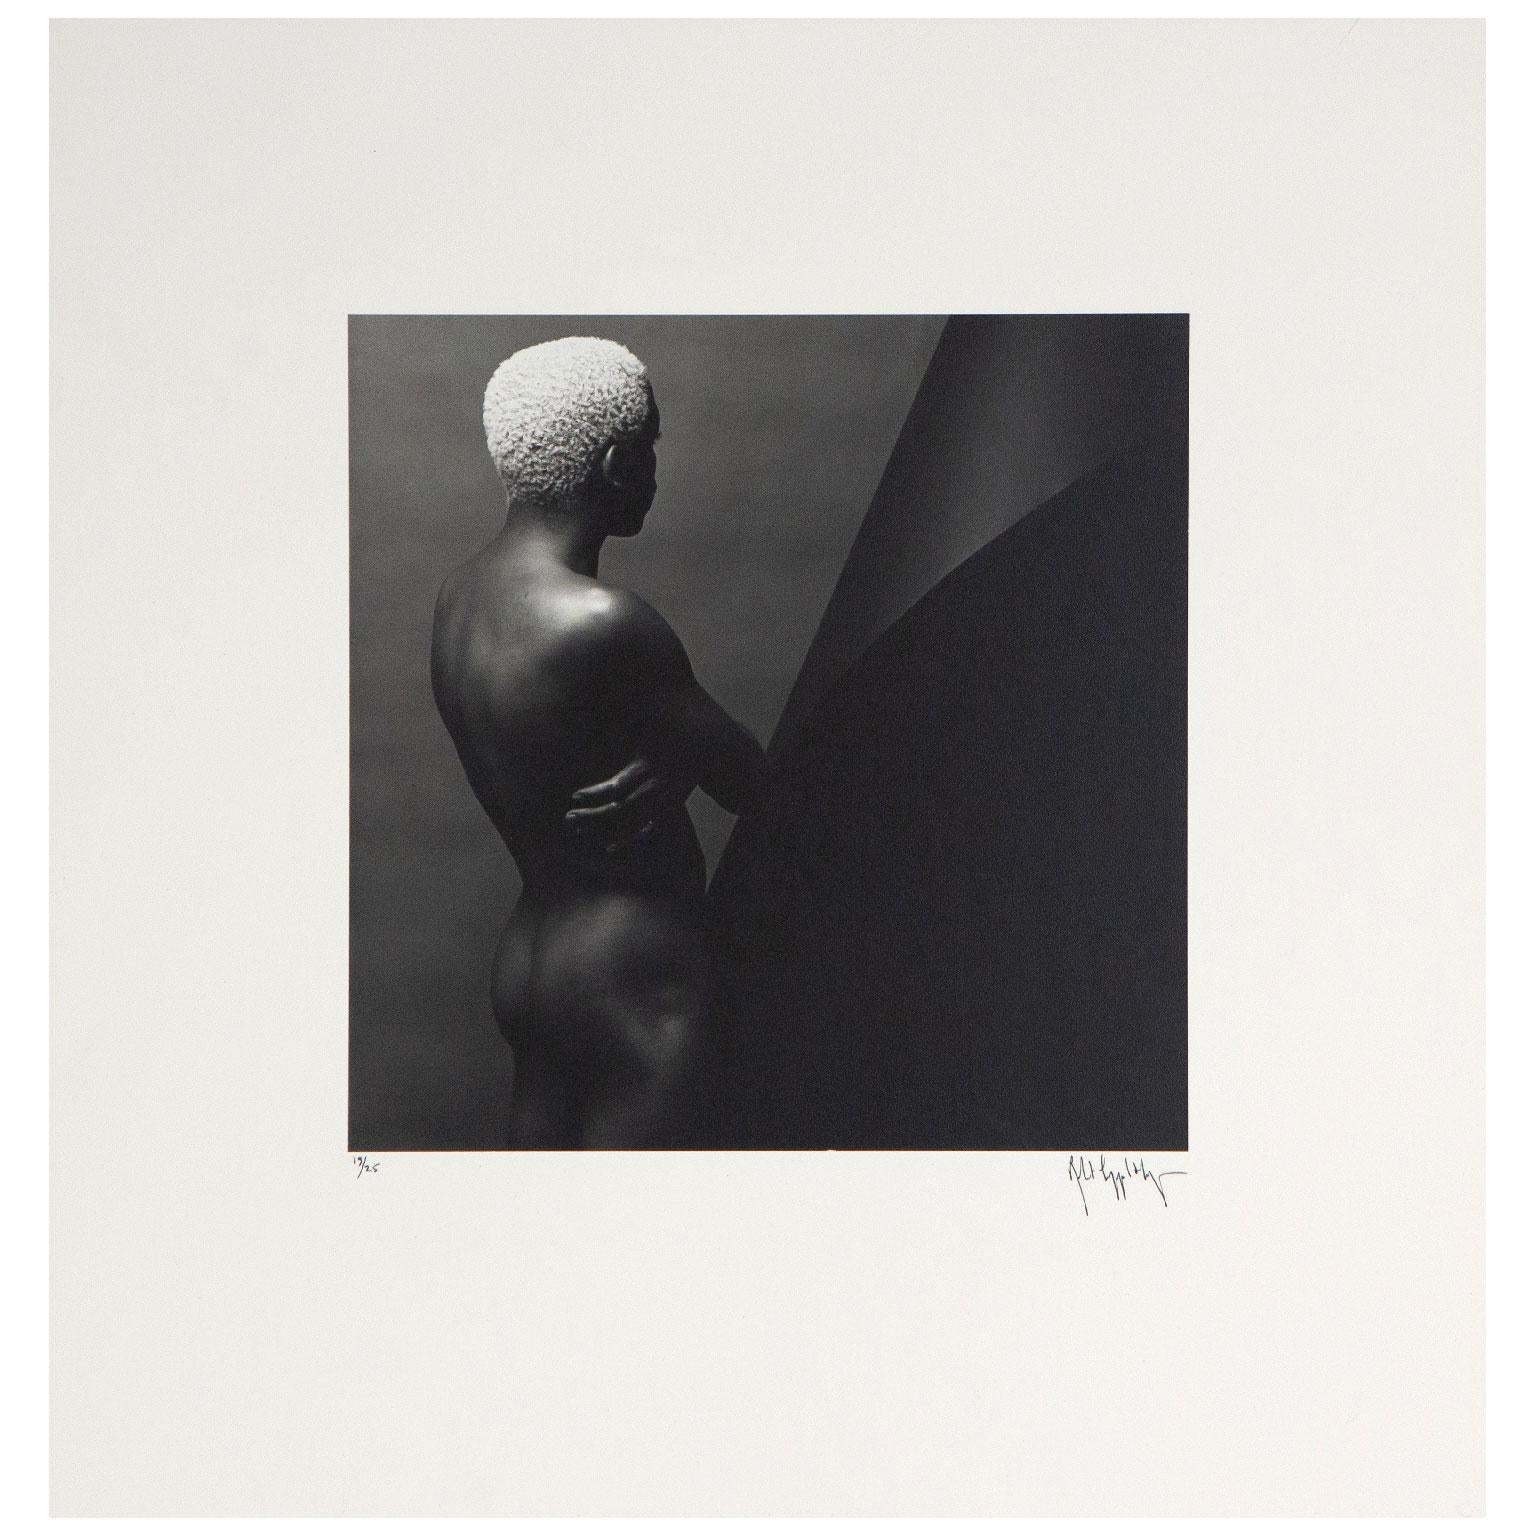 Robert Mapplethorpe's place in the canon was earned from his incredible output of images that ranged from beautiful to brutal. Mapplethorpe was one of the key artists who helped elevate photography from image-making to an important element of fine